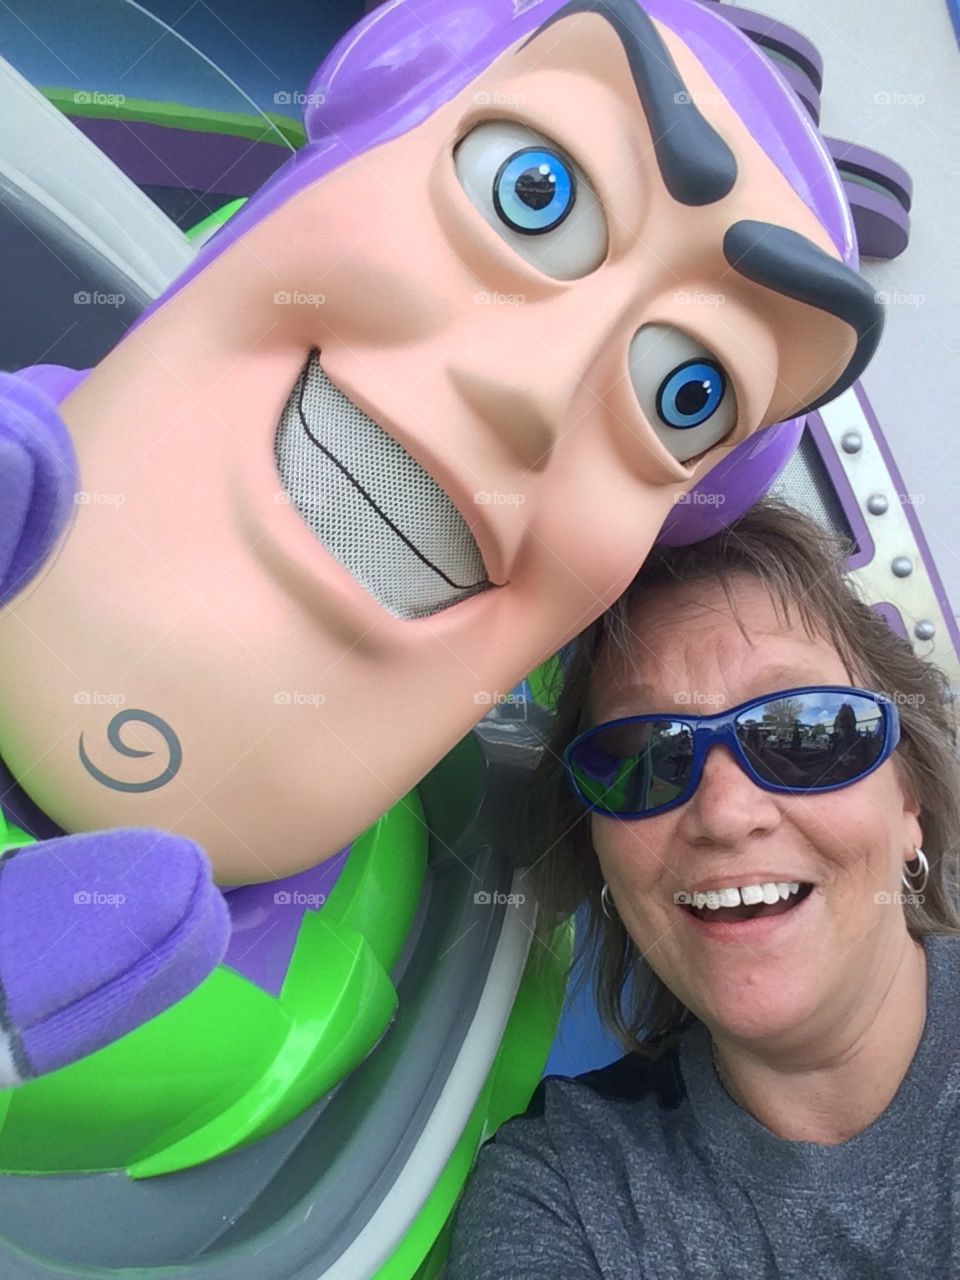 Me and Buzz!!